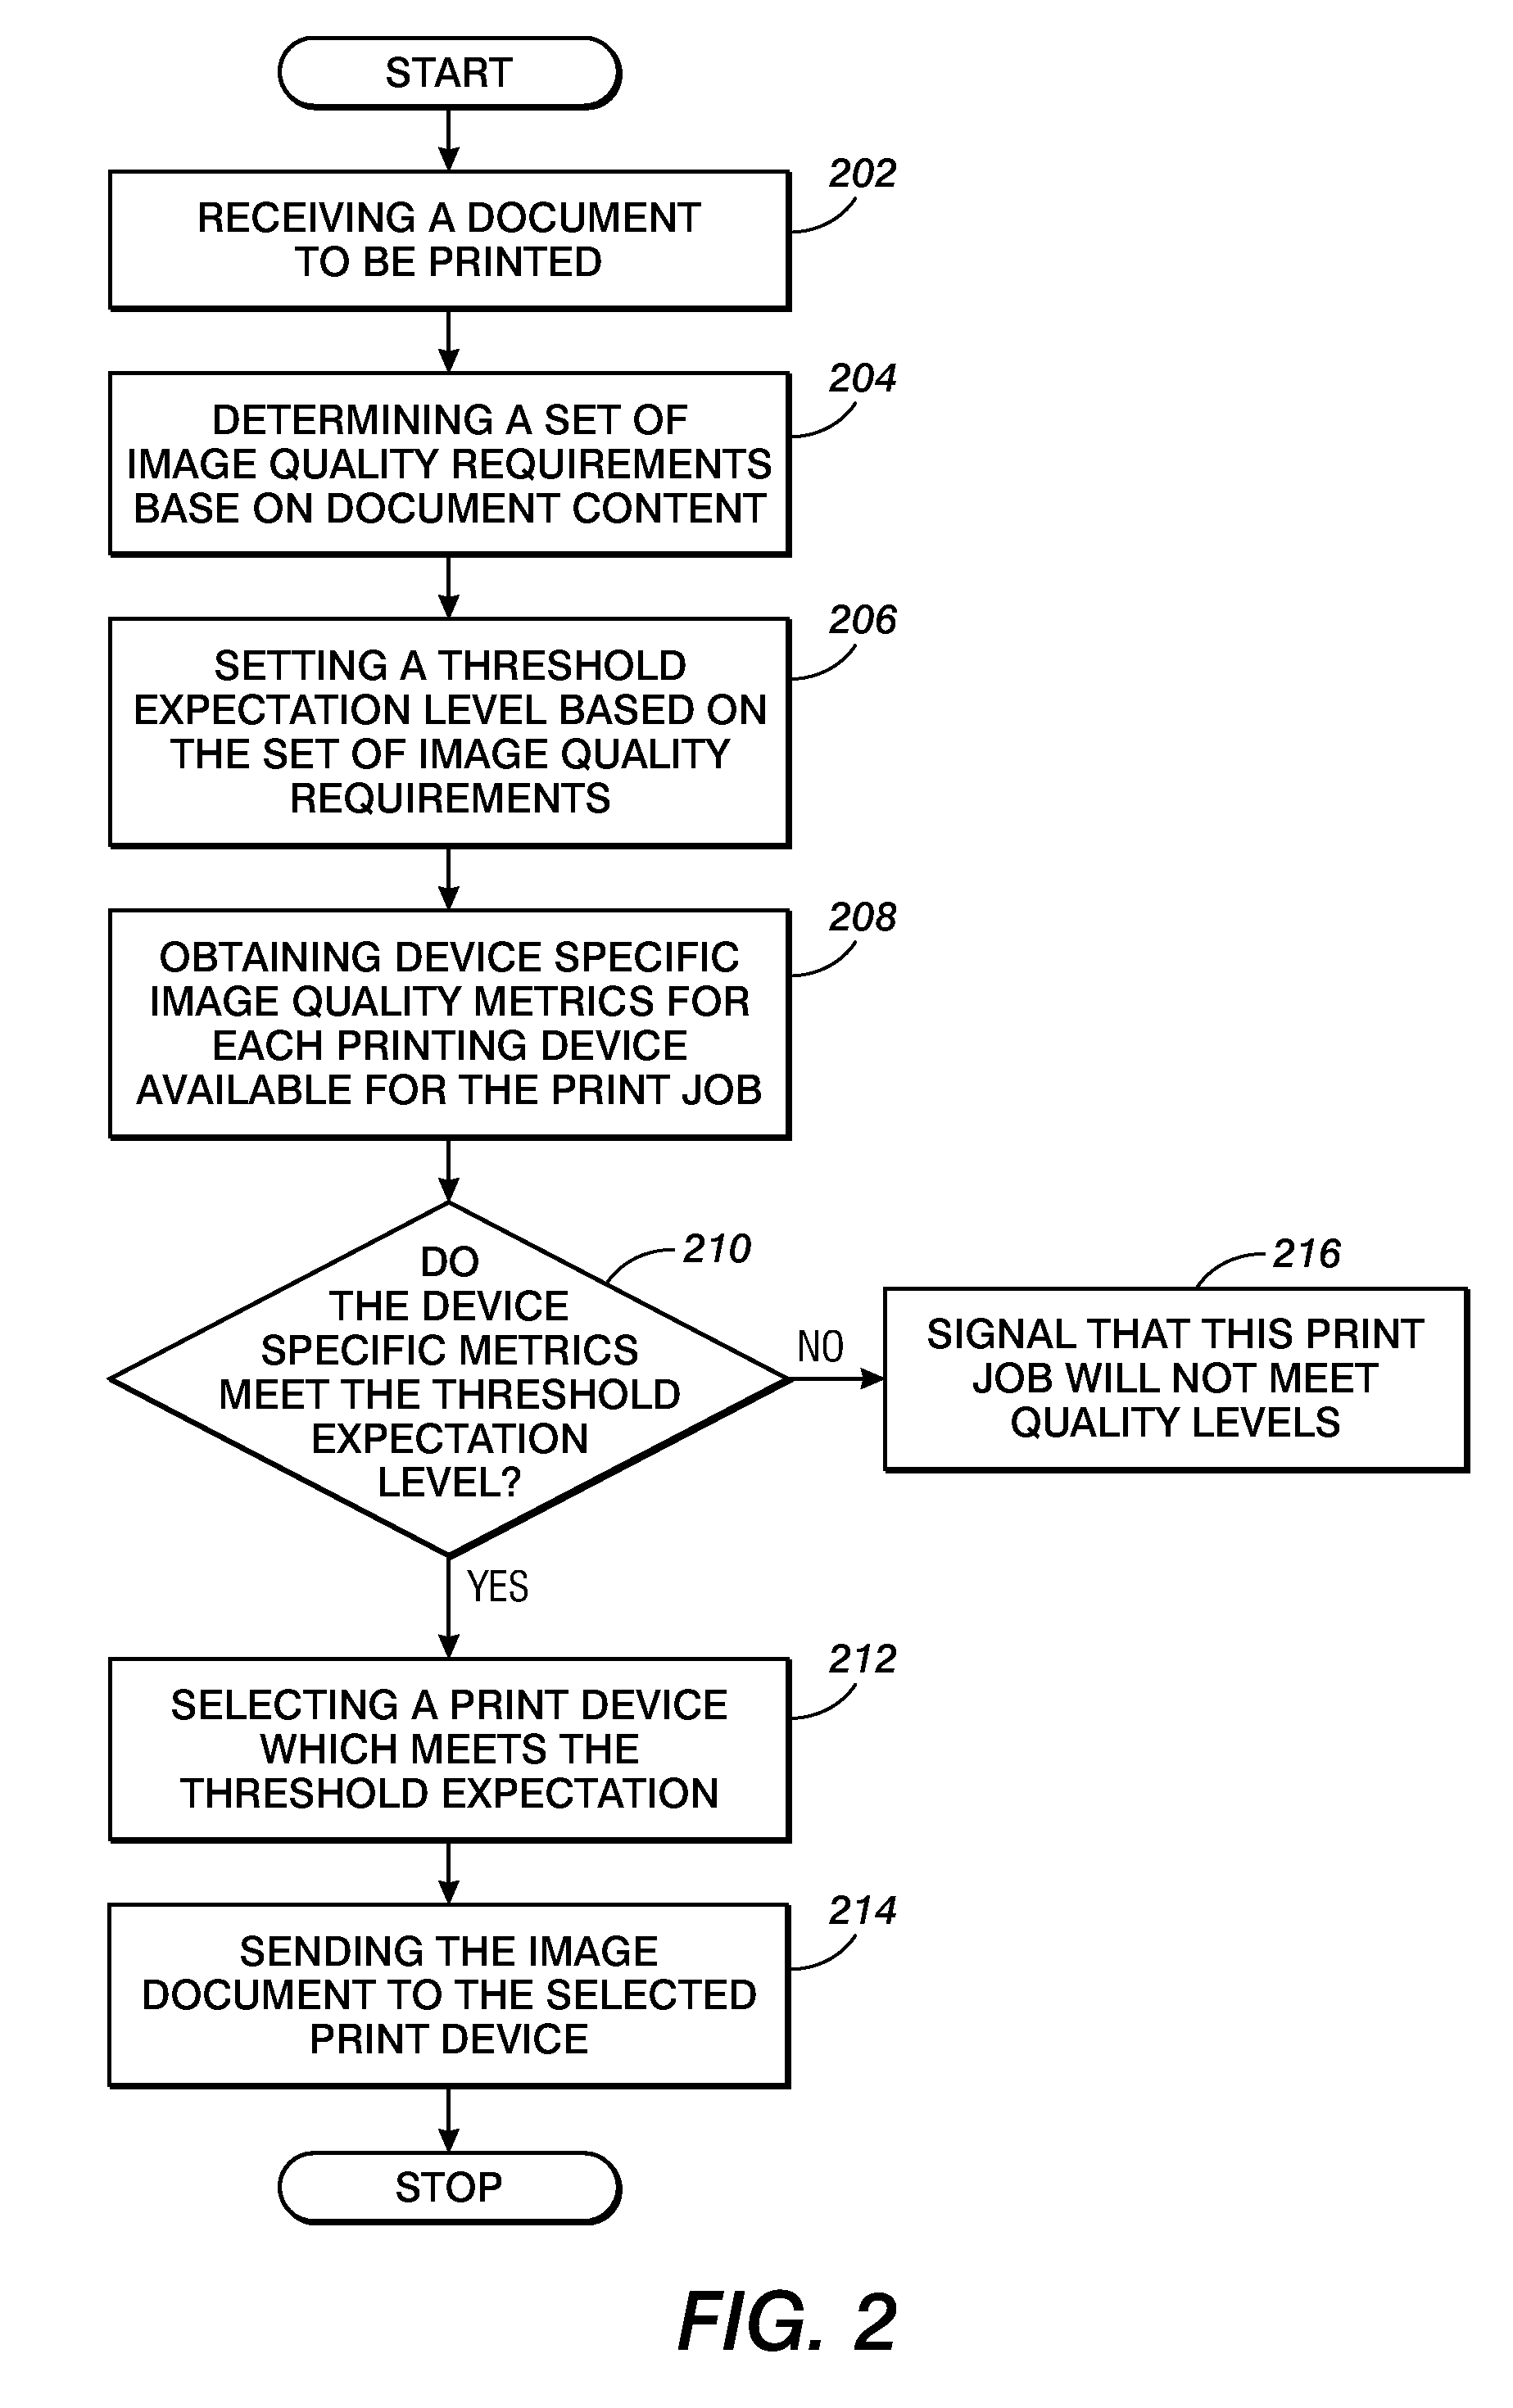 Print device selection in a networked print job environment